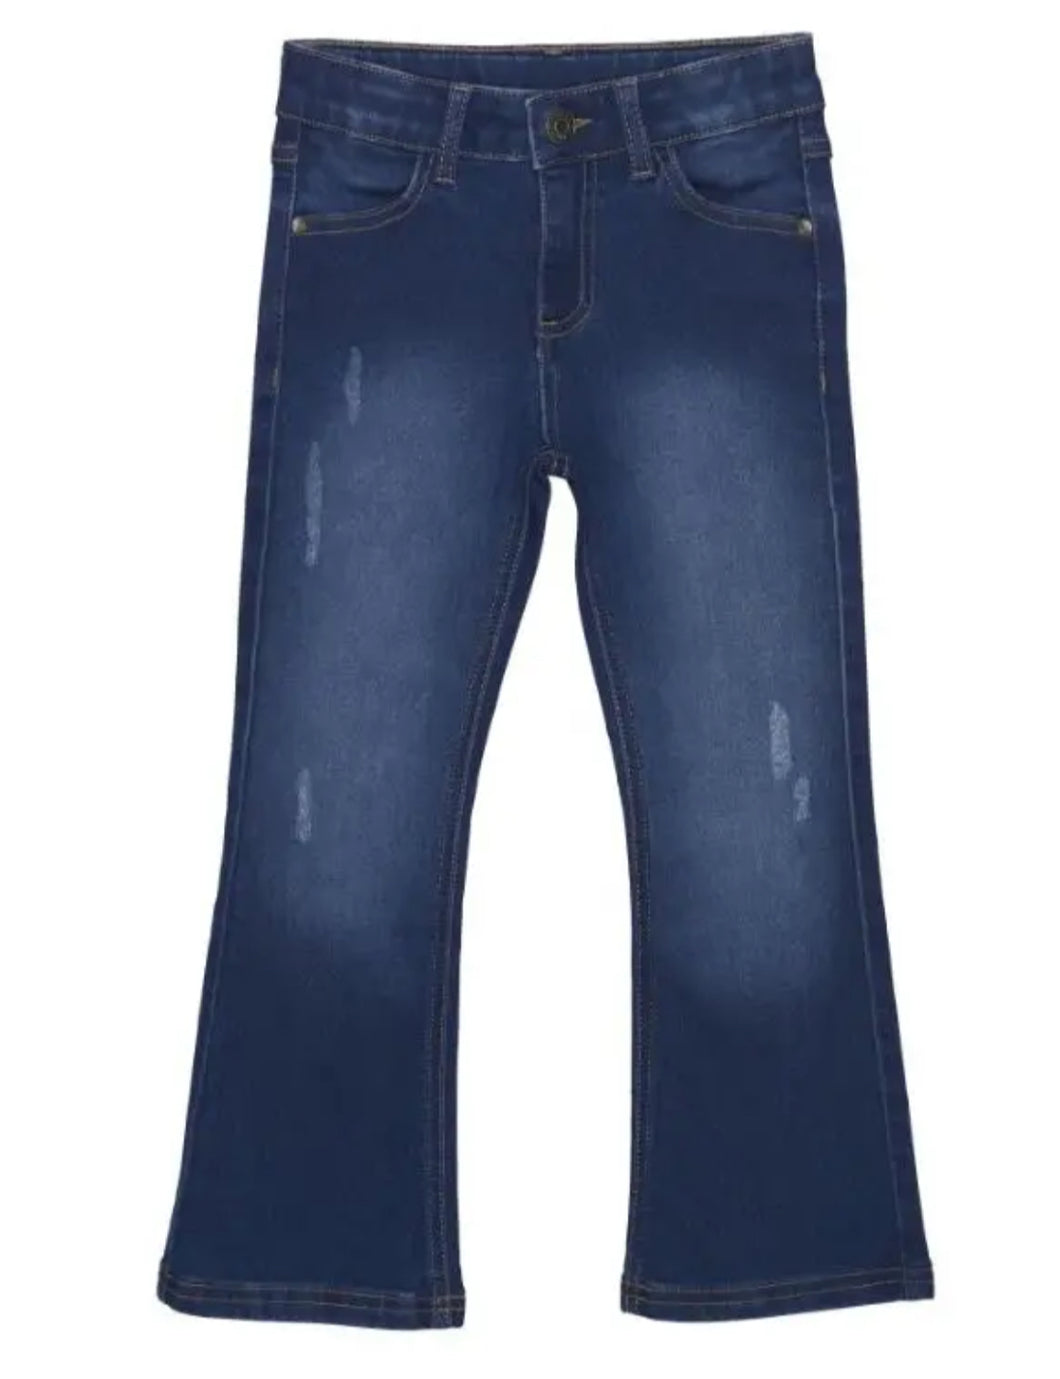 Minymo Denim Flared Jeans: Size 4 to 12 Years